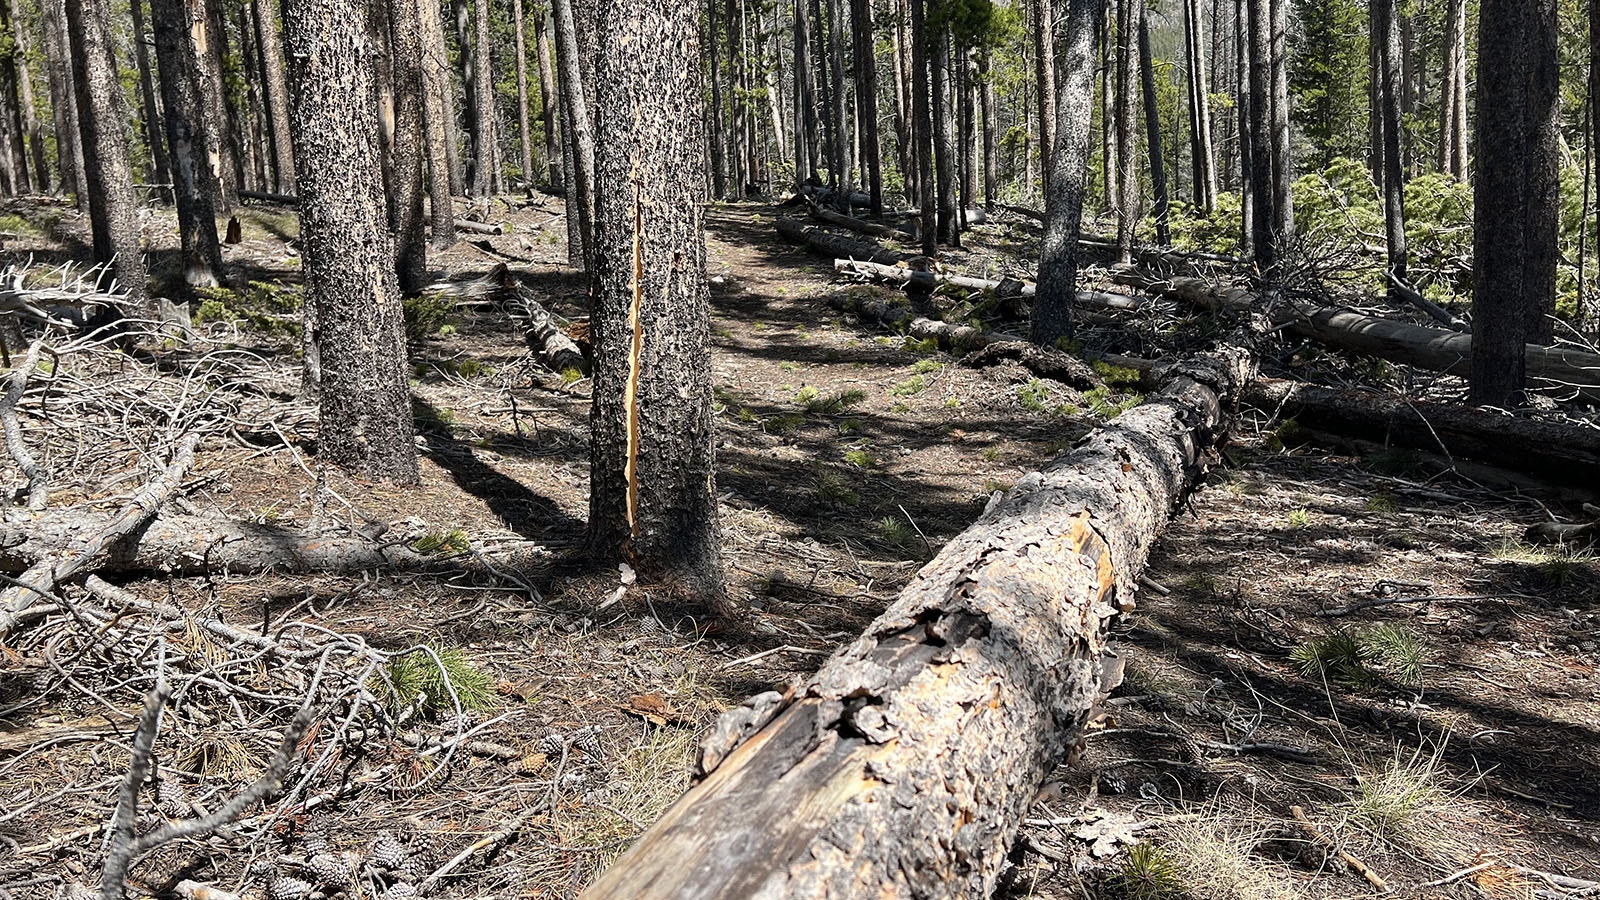 After recent severe wind storms, one tree pictured here fallen across the Meadow Loop trail in the Snowy Range Mountains near Laramie, while another has a cracked trunk and will likely fall soon.